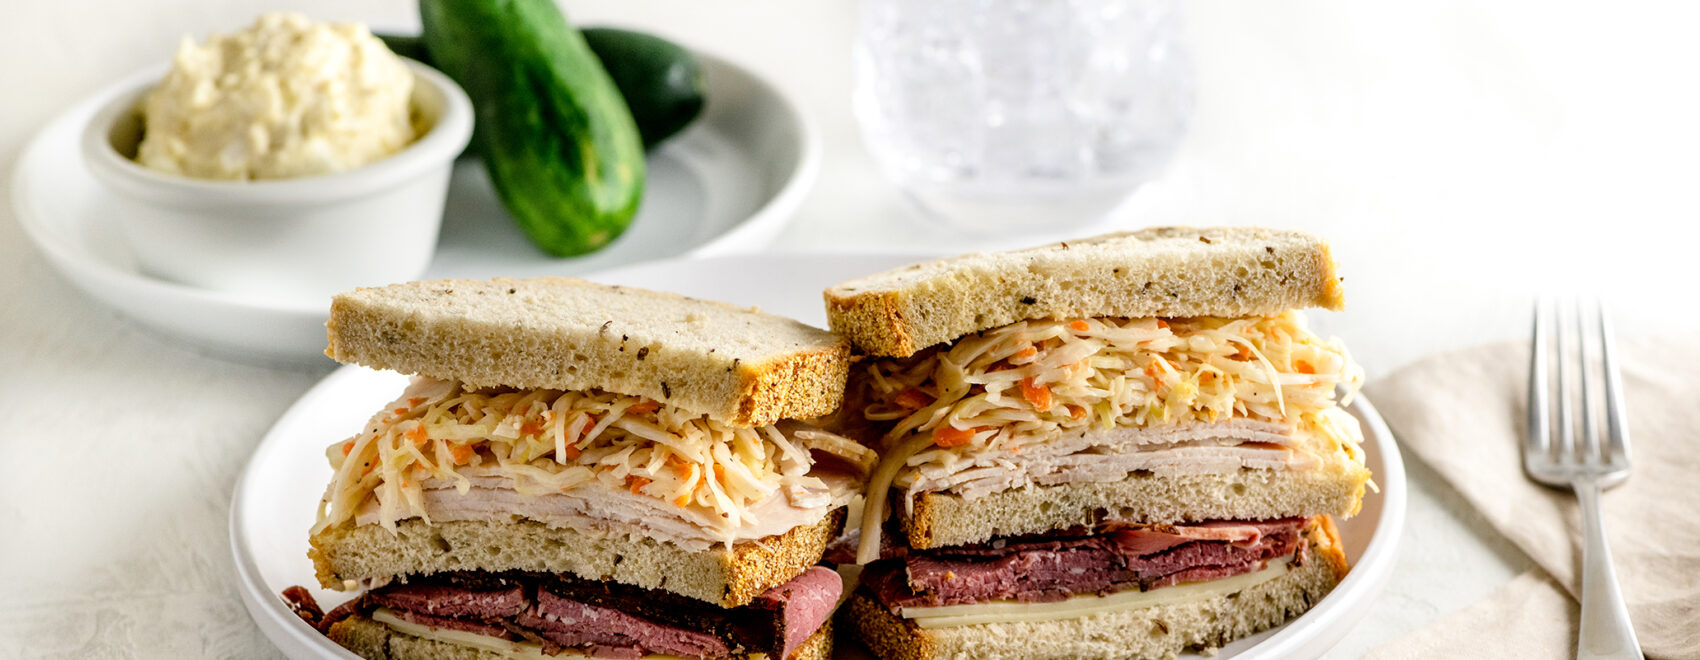 triple decker sandwich with pastrami, turkey and cole slaw between 3 slices of rye bread on a white plate. Pickles and potato salad on the side.